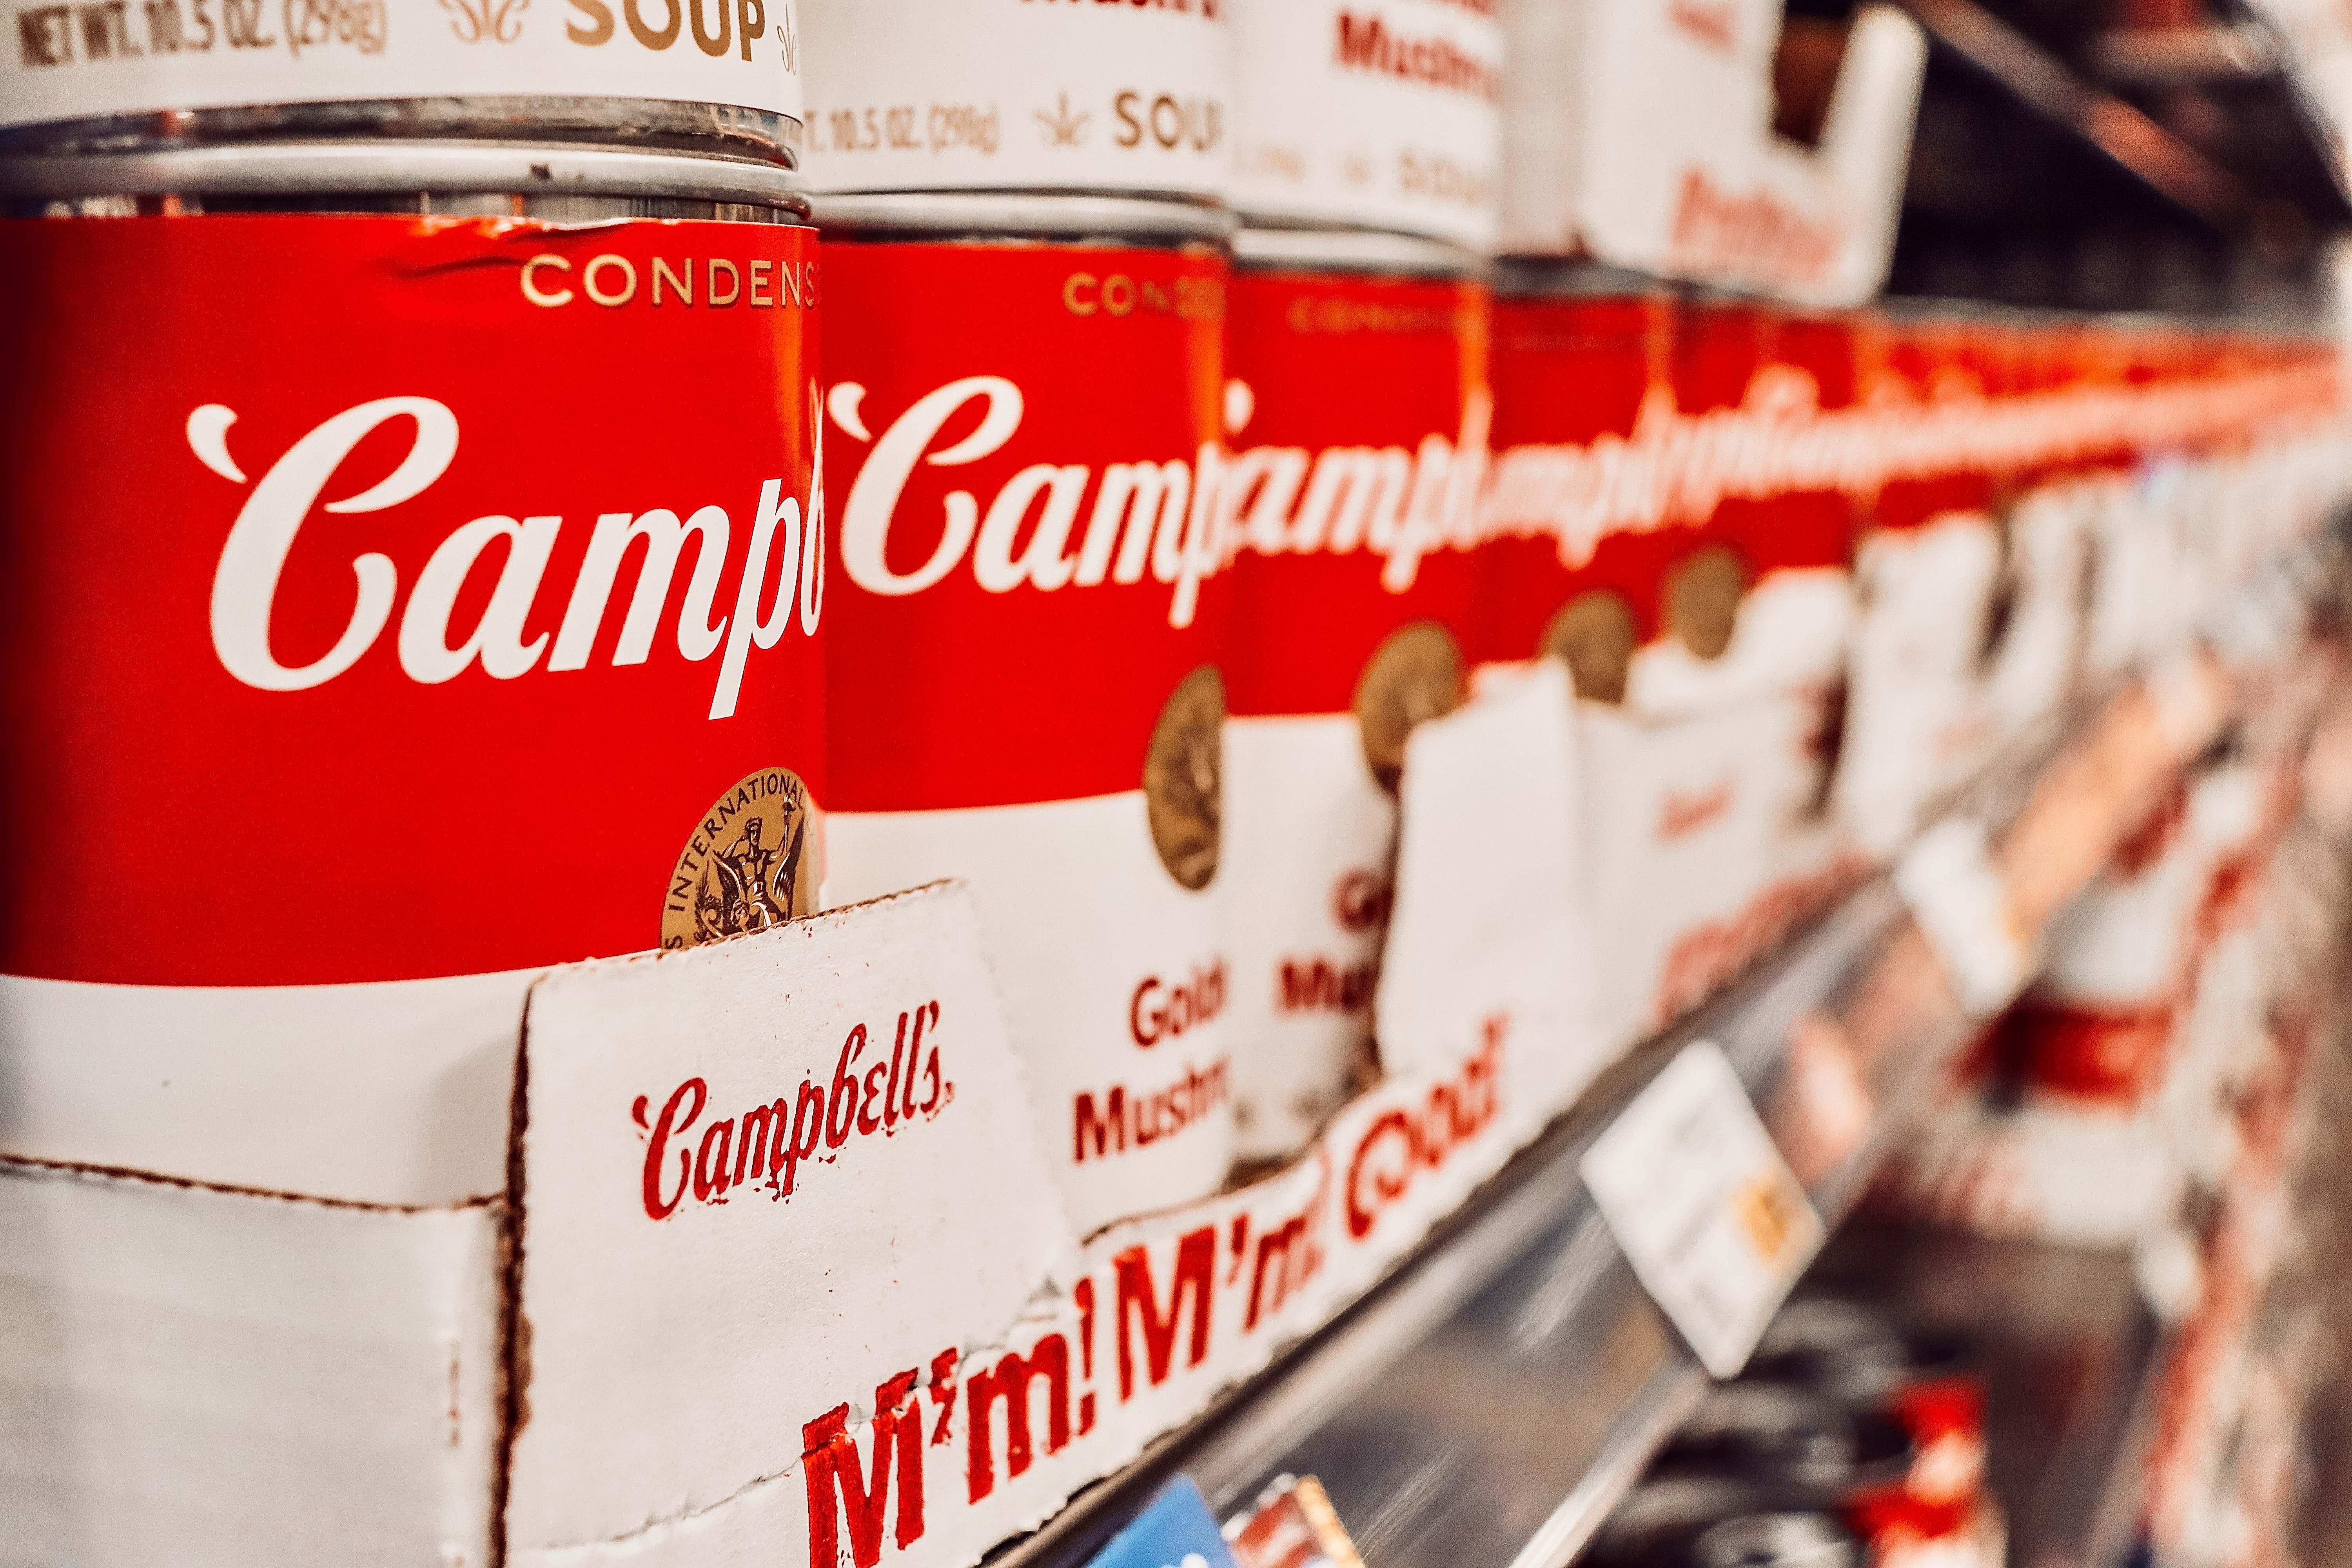 A shelf of identical tins of Campbell’s Soup | Photo by Kelly Common on Unsplash